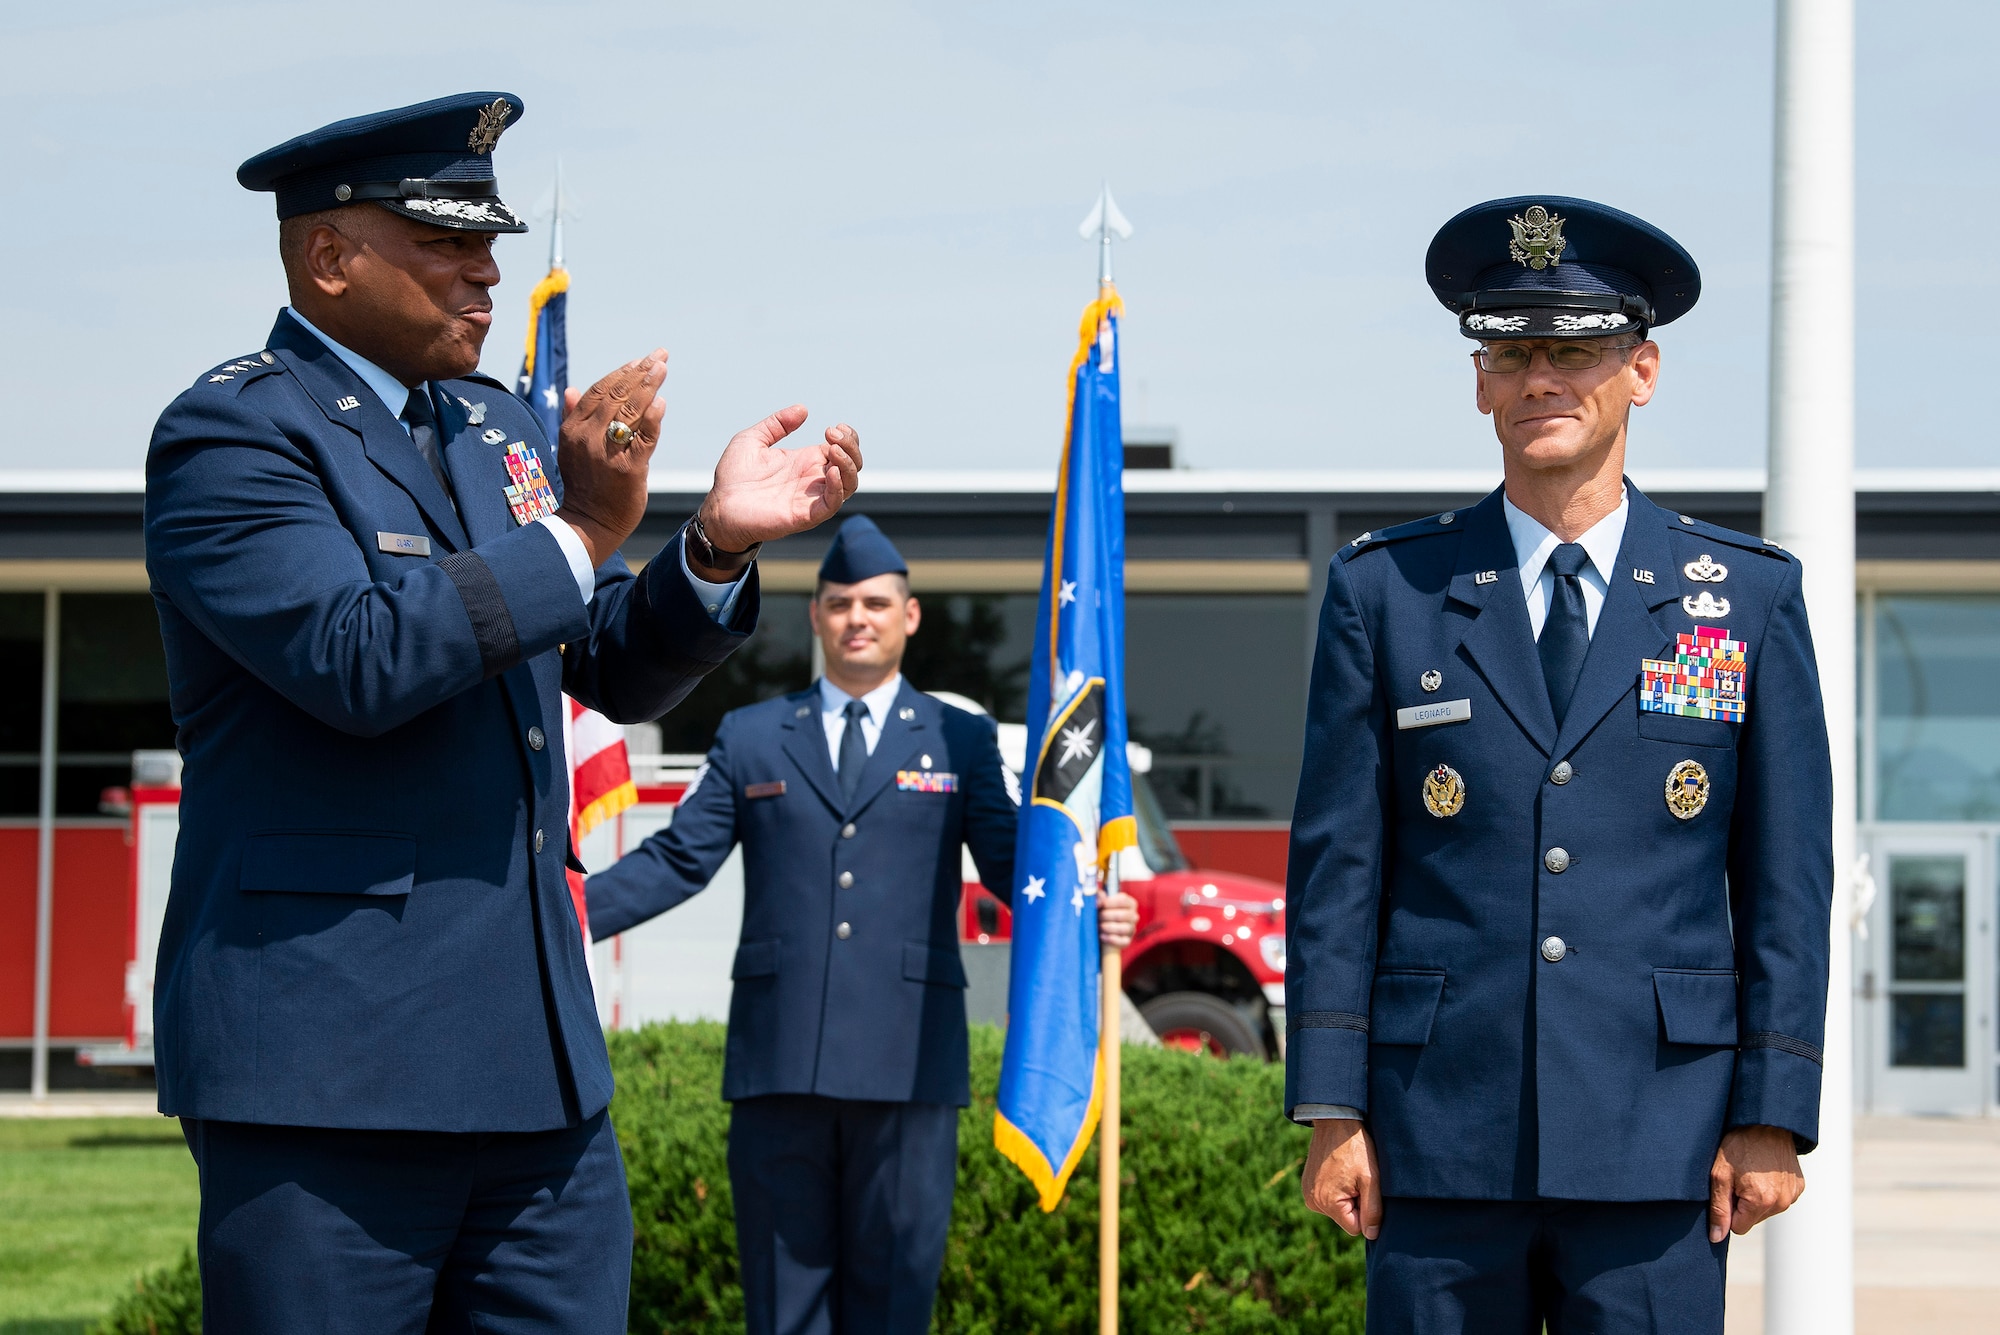 Lieutenant Gen. Richard Clark, superintendent of the Air Force Academy stands next to Col. Christopher Leonard, commander of the 10th Air Base Wing,